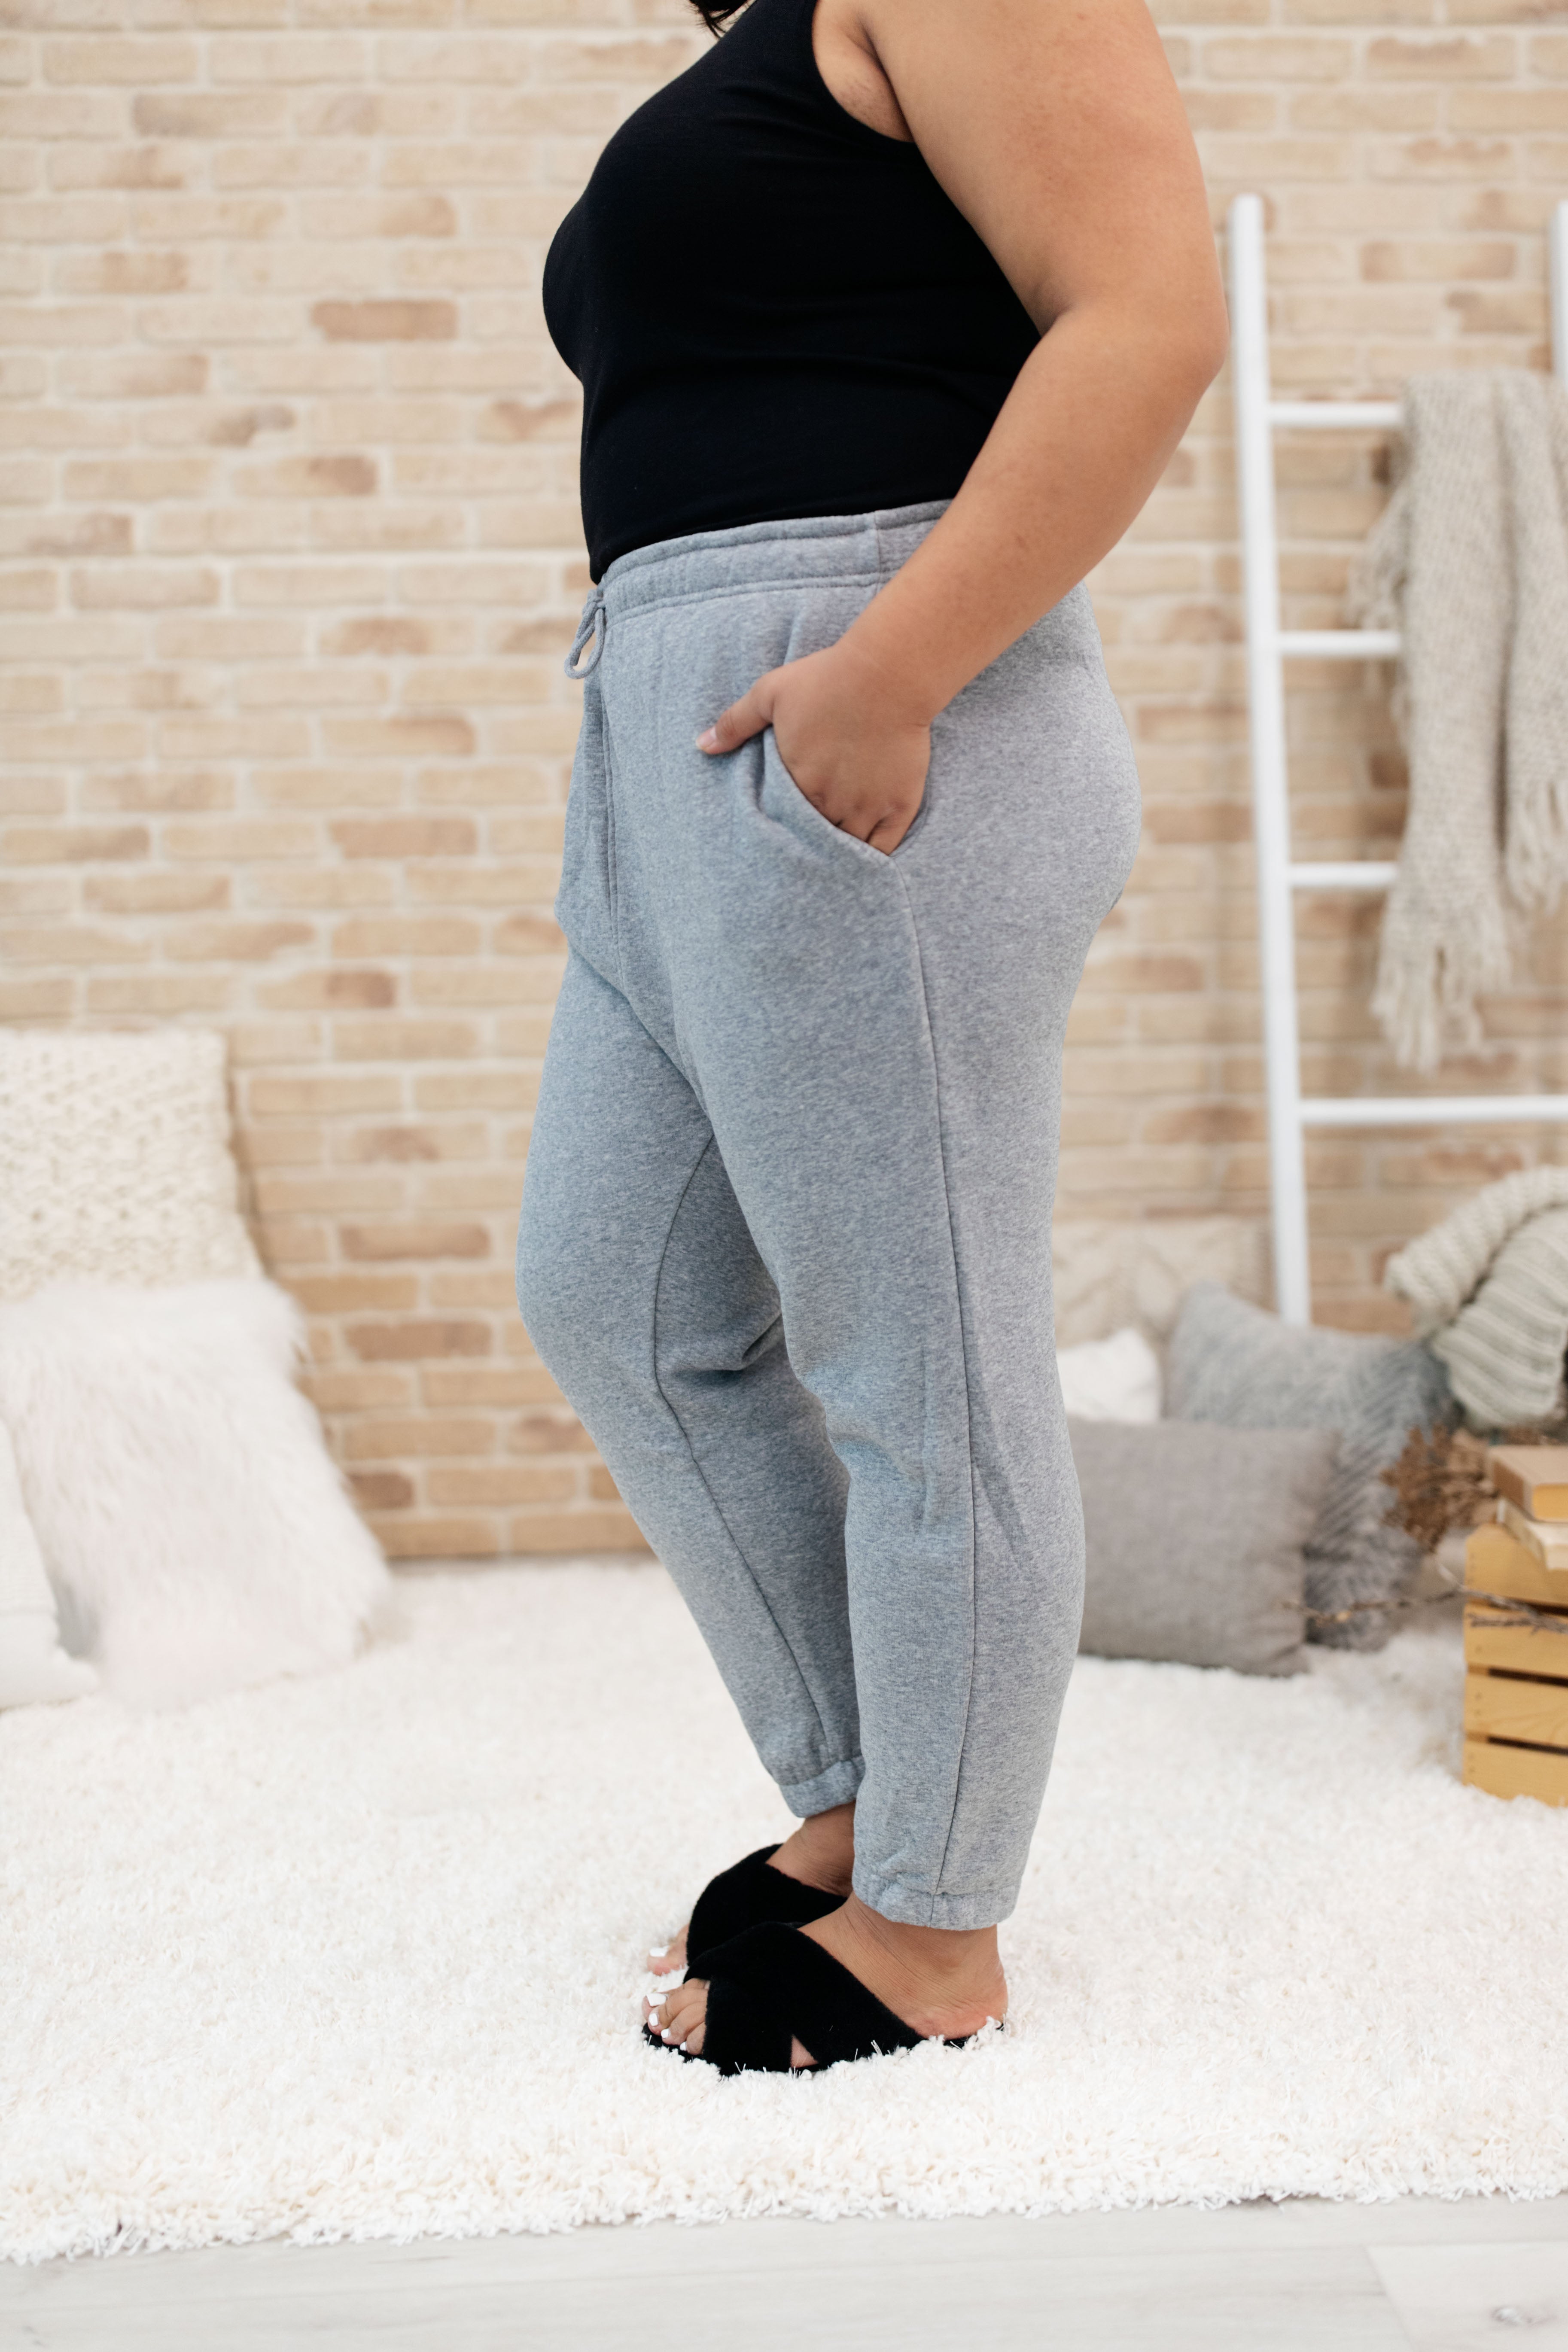 Chill Weekend Sweatpants in Gray